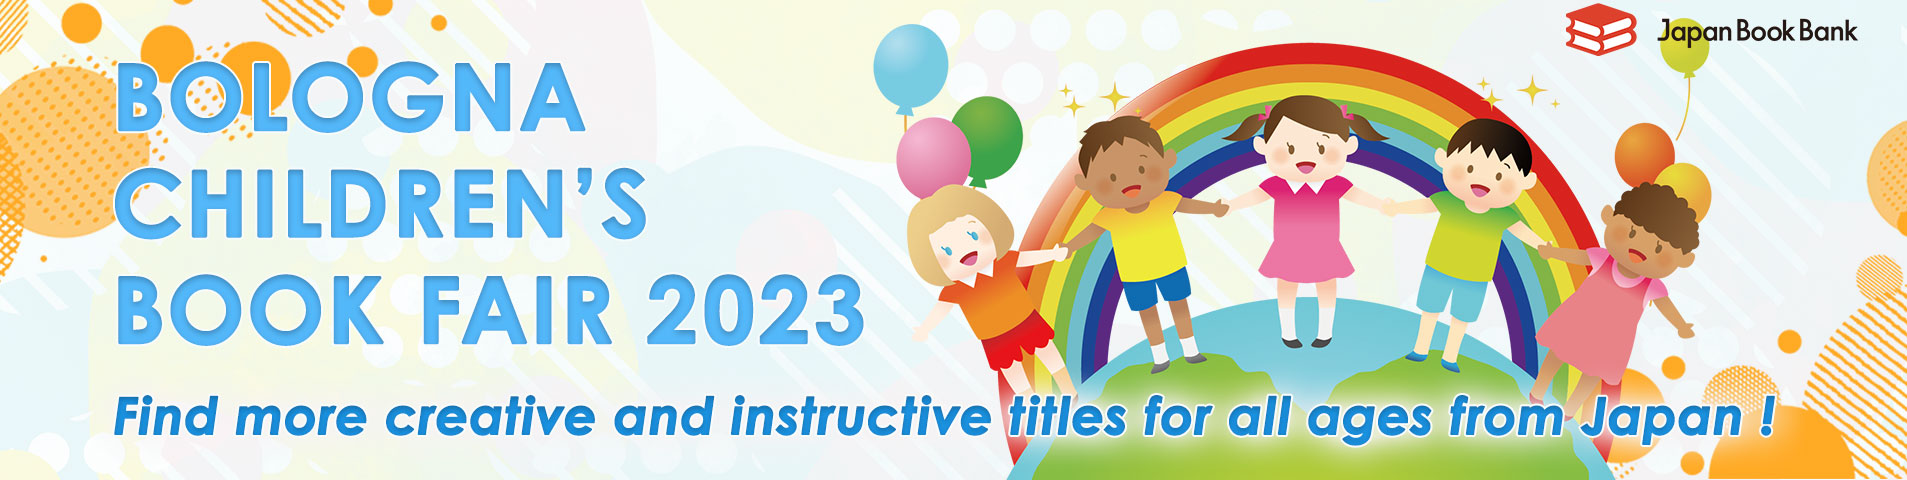 BOLOGNA CHILDREN'S BOOK FAIR 2023
~Find more creative and instructive titles for all ages from Japan!~